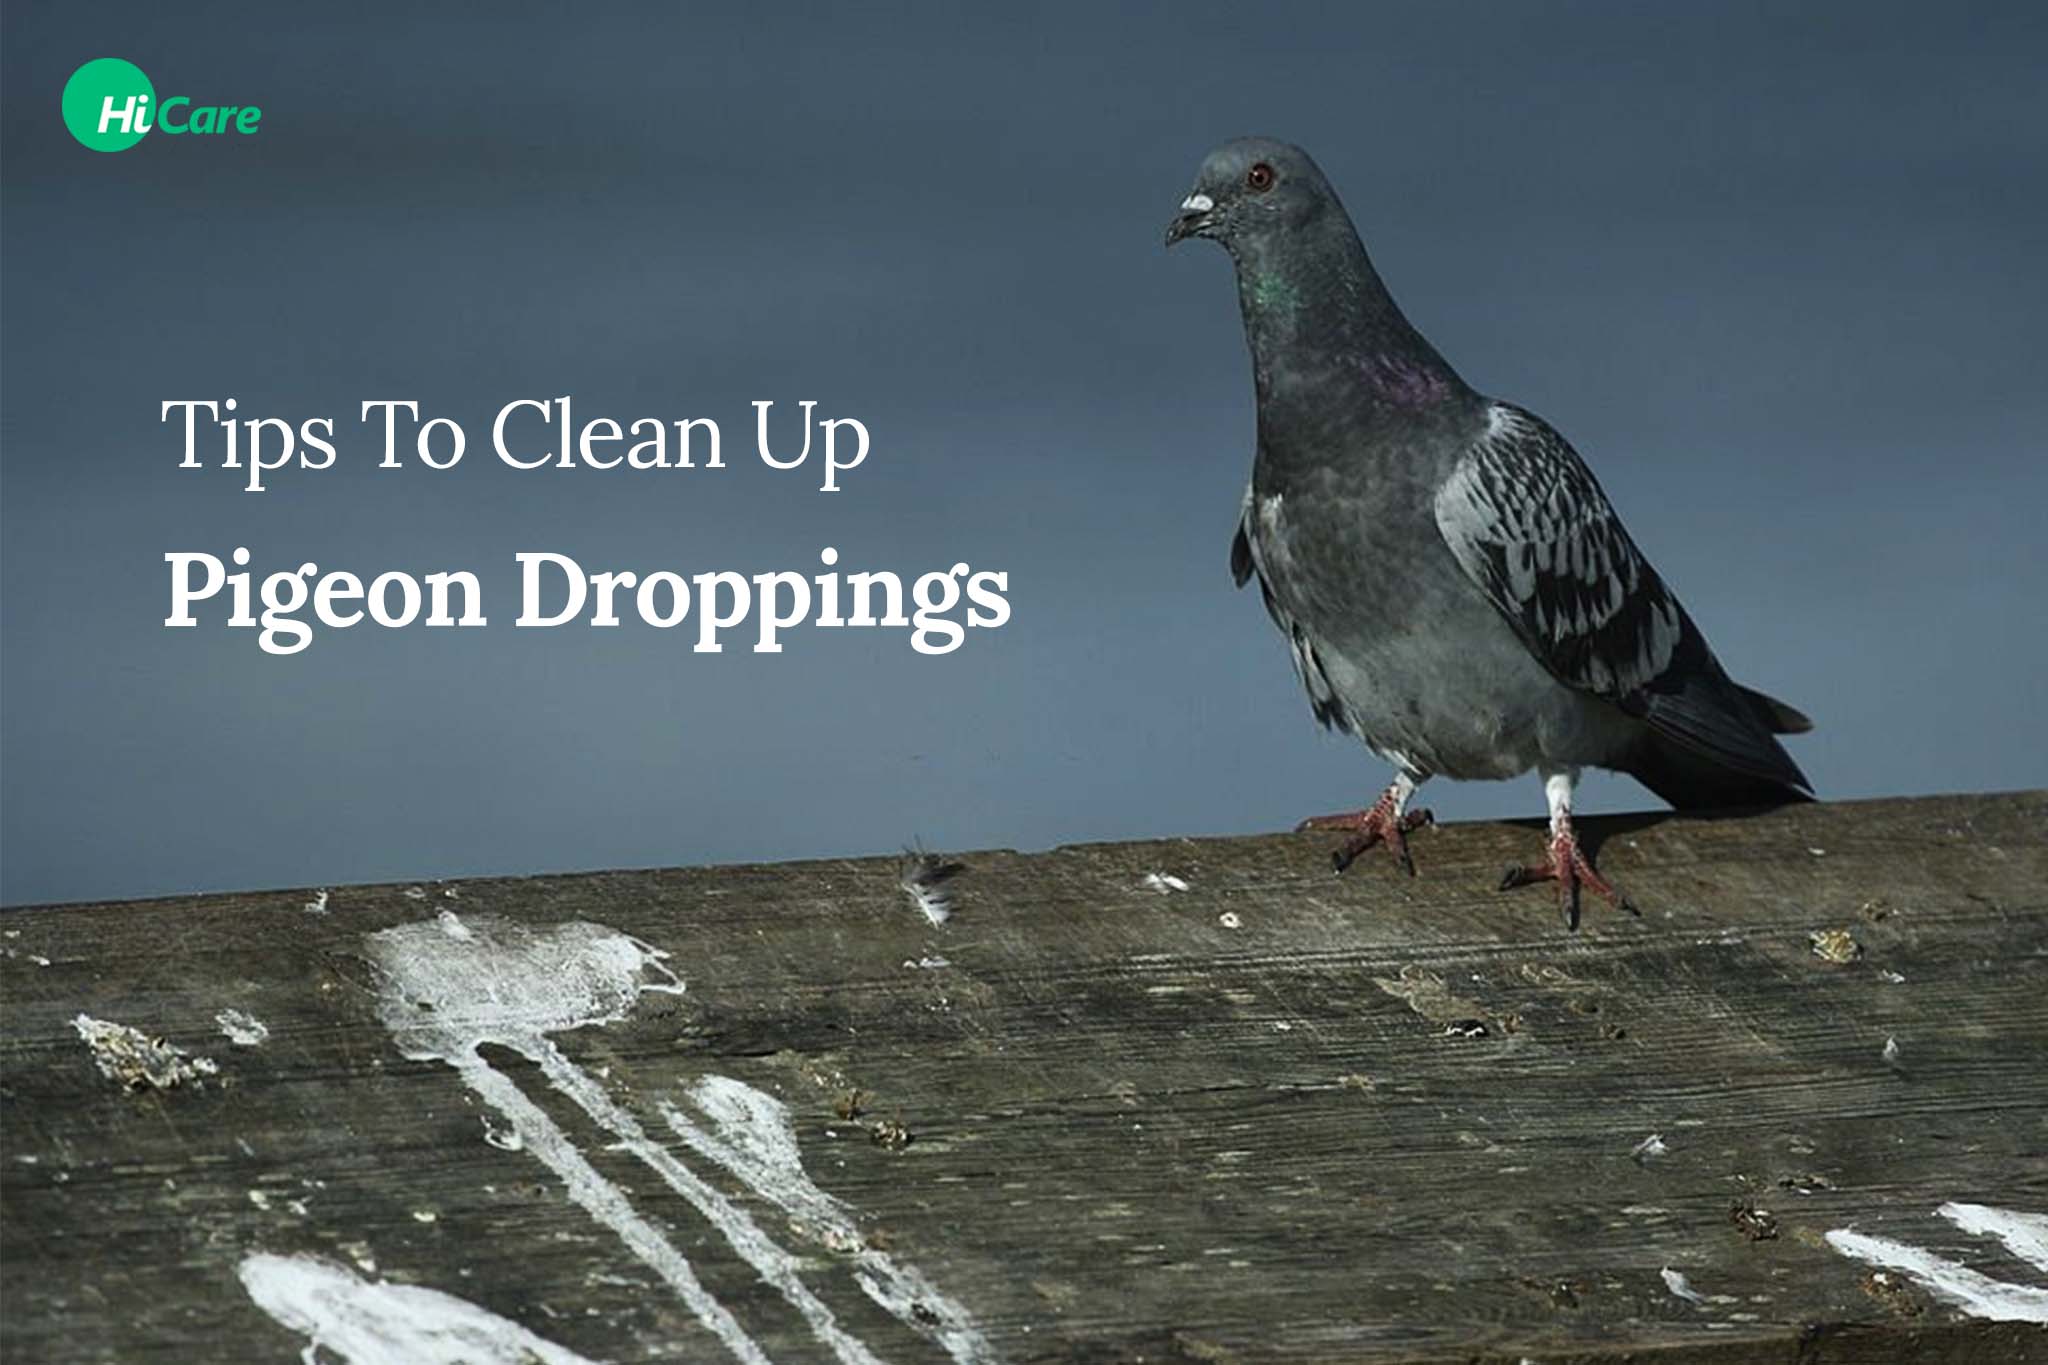 8 Simple Tips to Clean up Pigeon Droppings Properly | HiCare